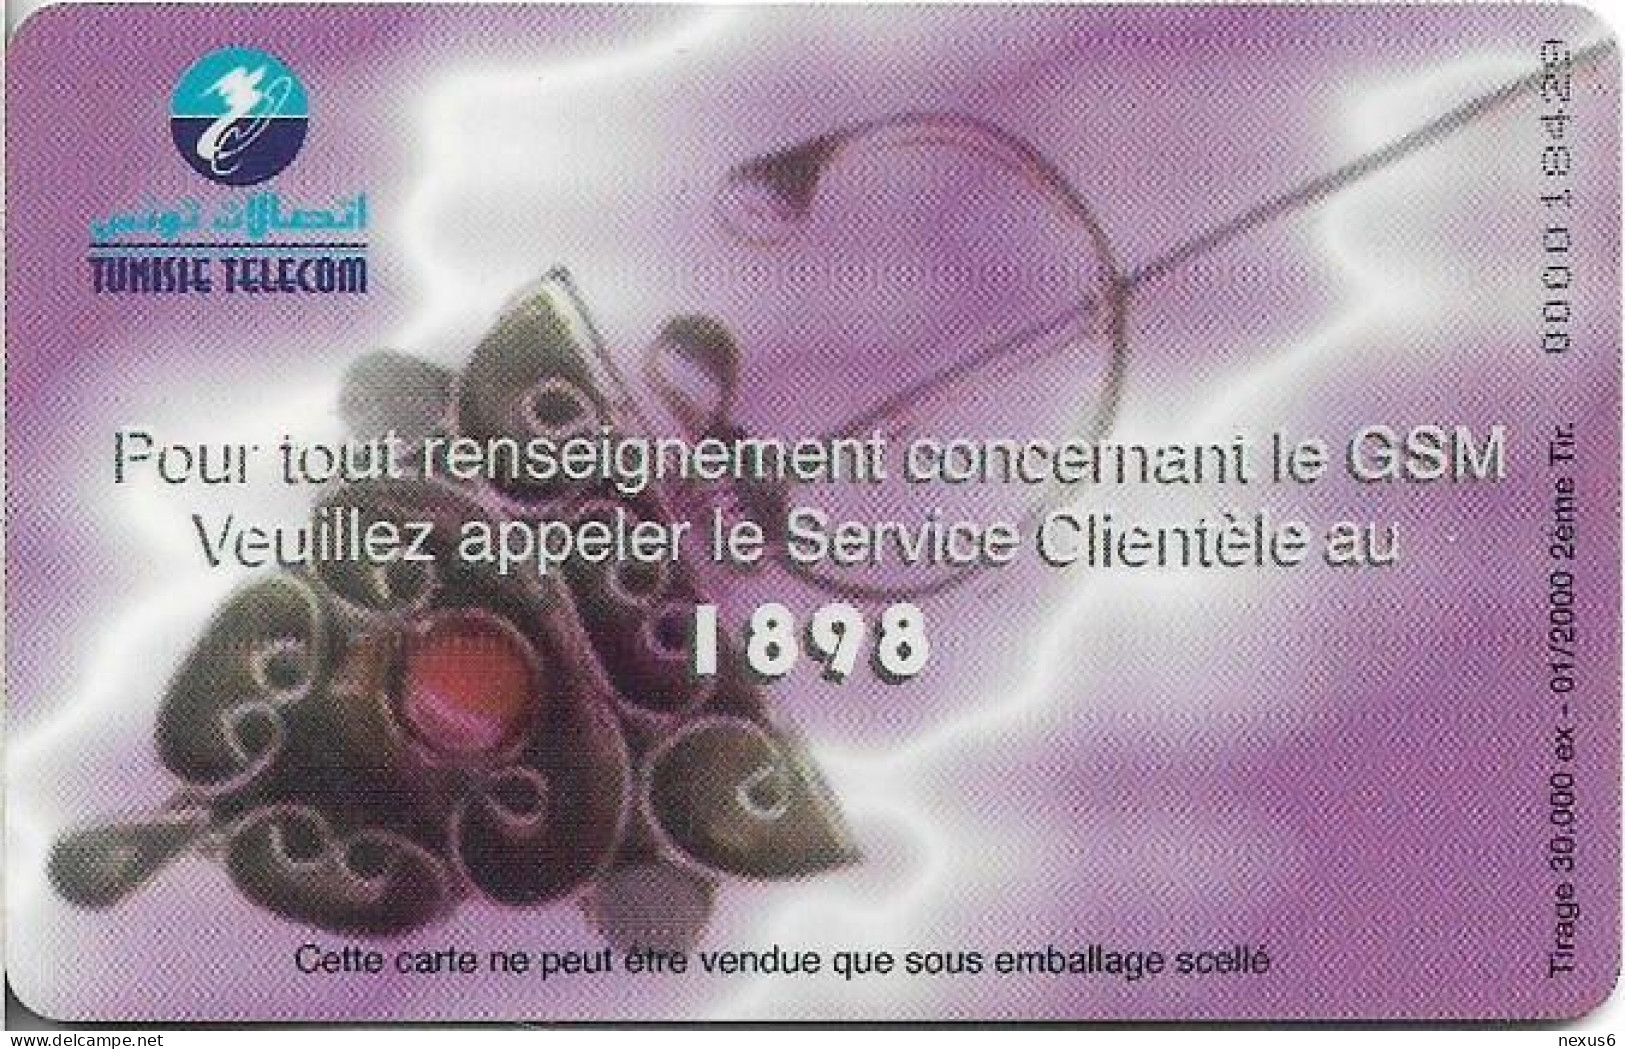 Tunisia - Tunisie Telecom - Global System For Mobile Comm., 100Units, Chip Oberthur, 01.2000, 30.000ex, Used - Tunesien